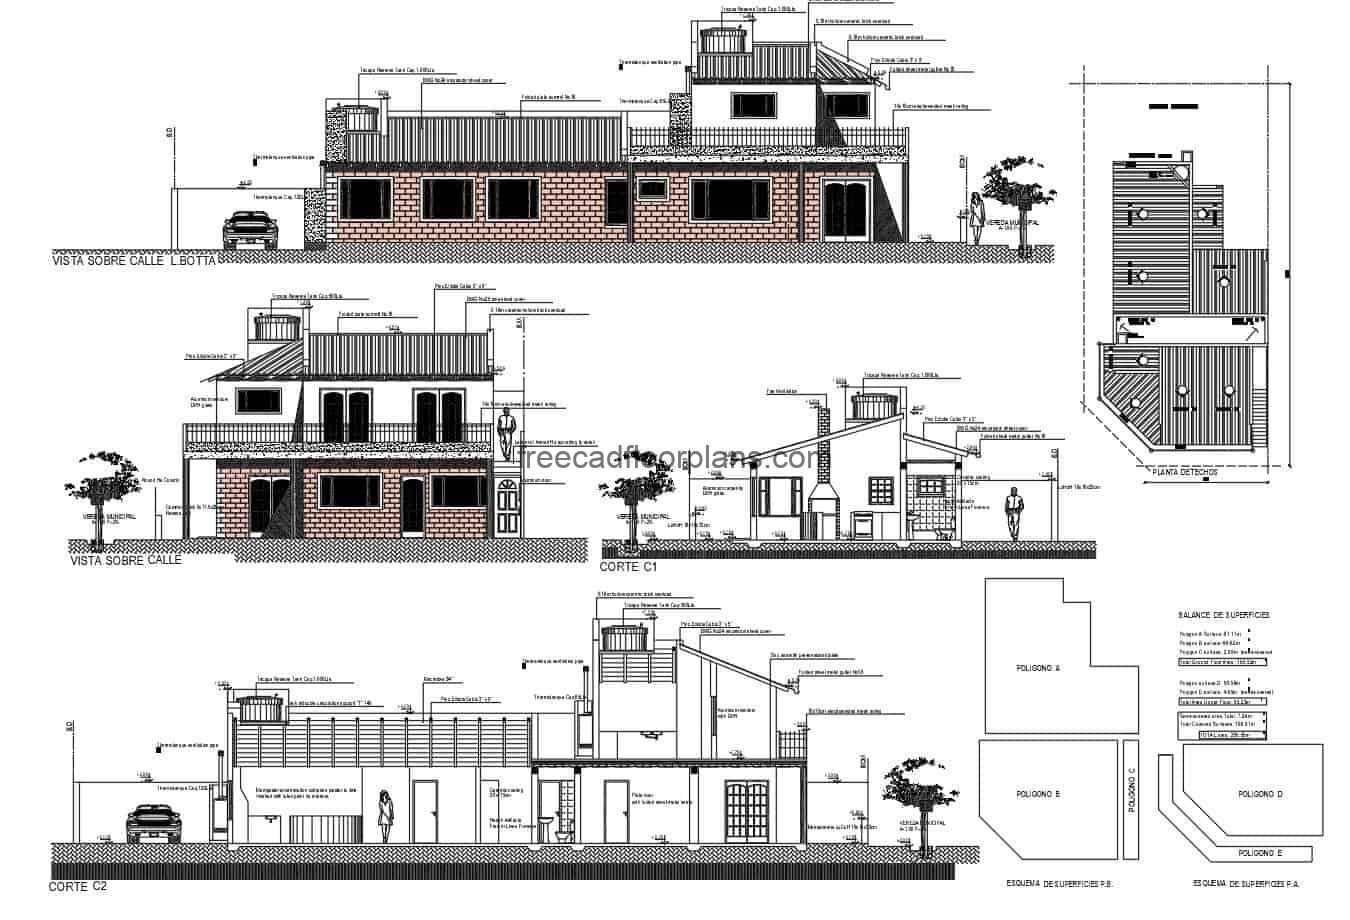 Building drawn in autocad of house with commercial premises of two levels, file for free download, architectural plans, sizing, elevations and technical construction plans.